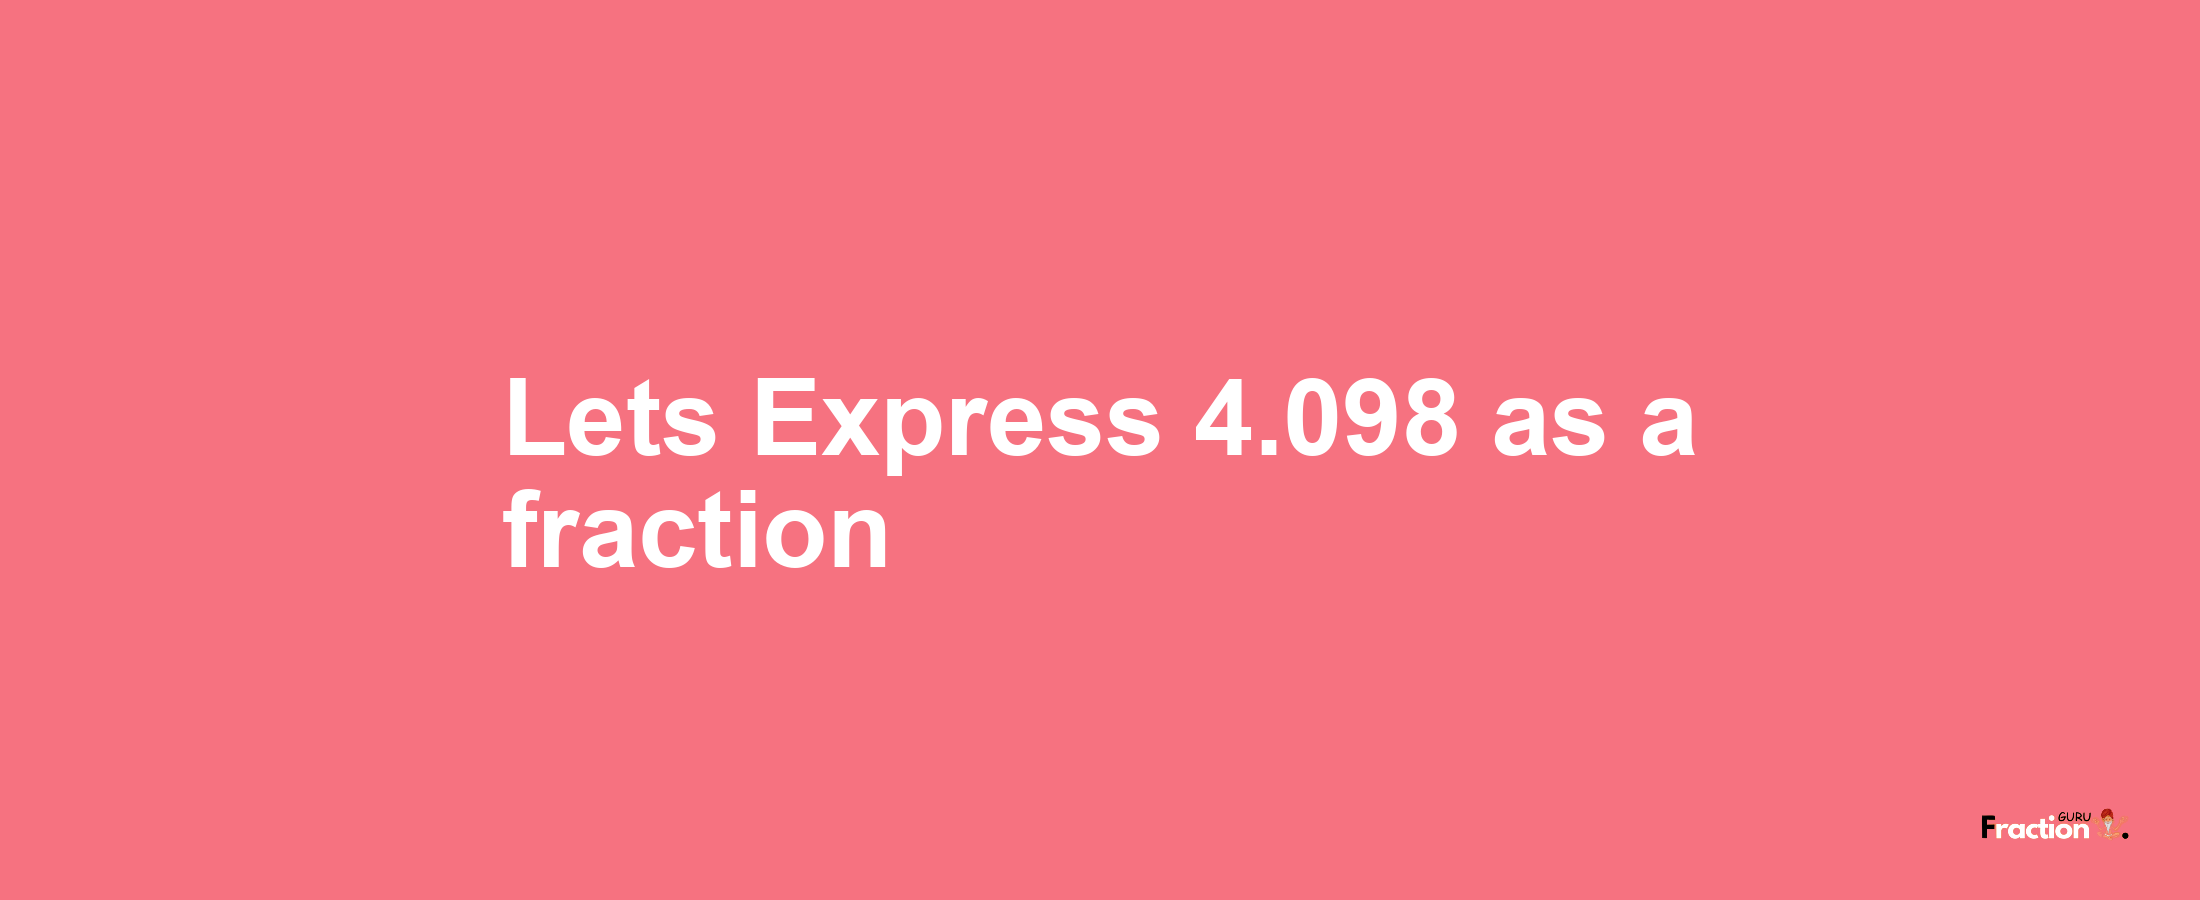 Lets Express 4.098 as afraction